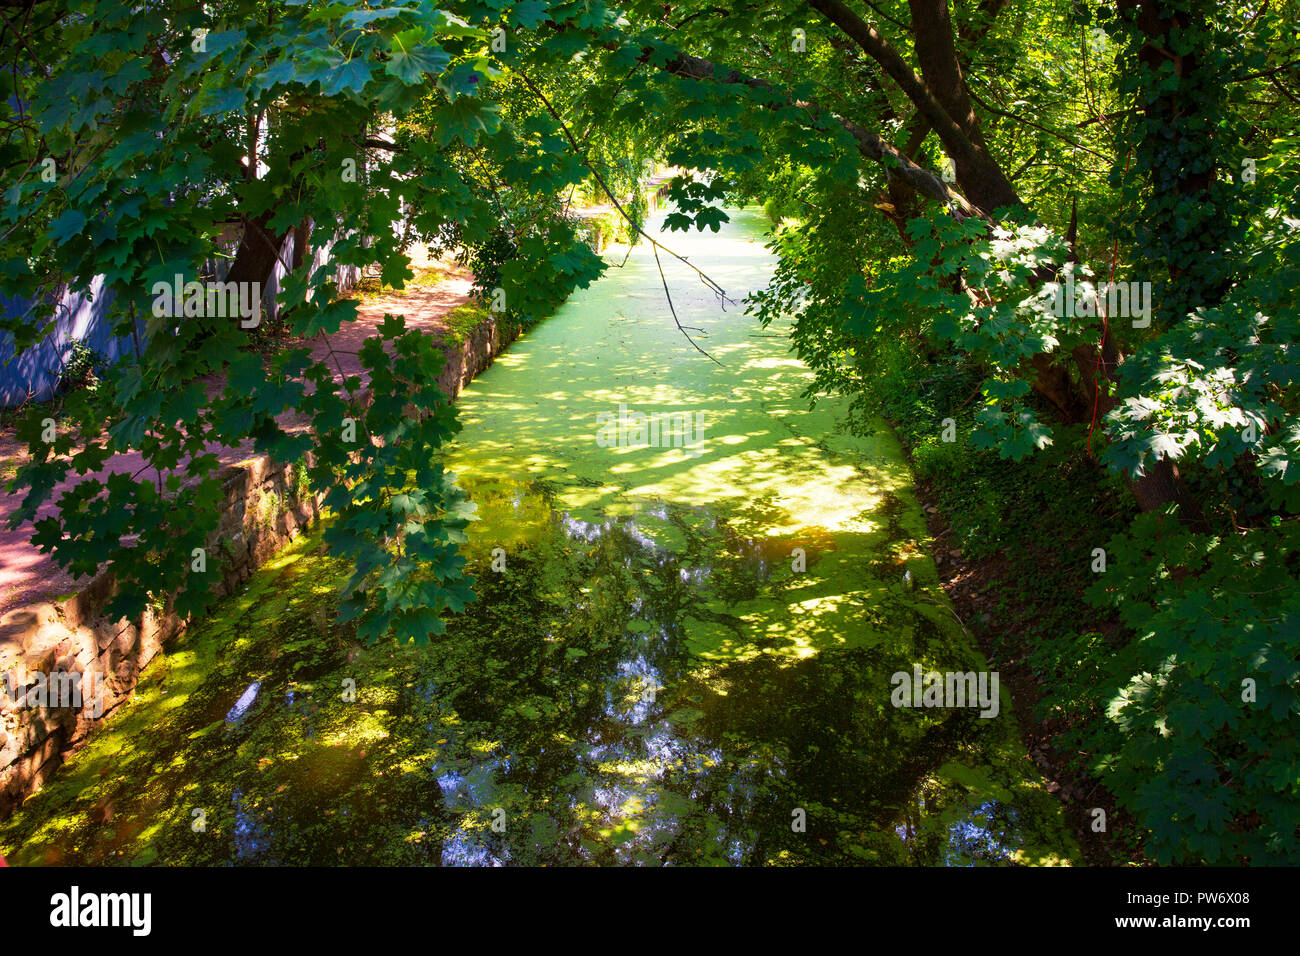 An 18th century canal and tow path used in the transport of goods, New Hope, PA. Stock Photo